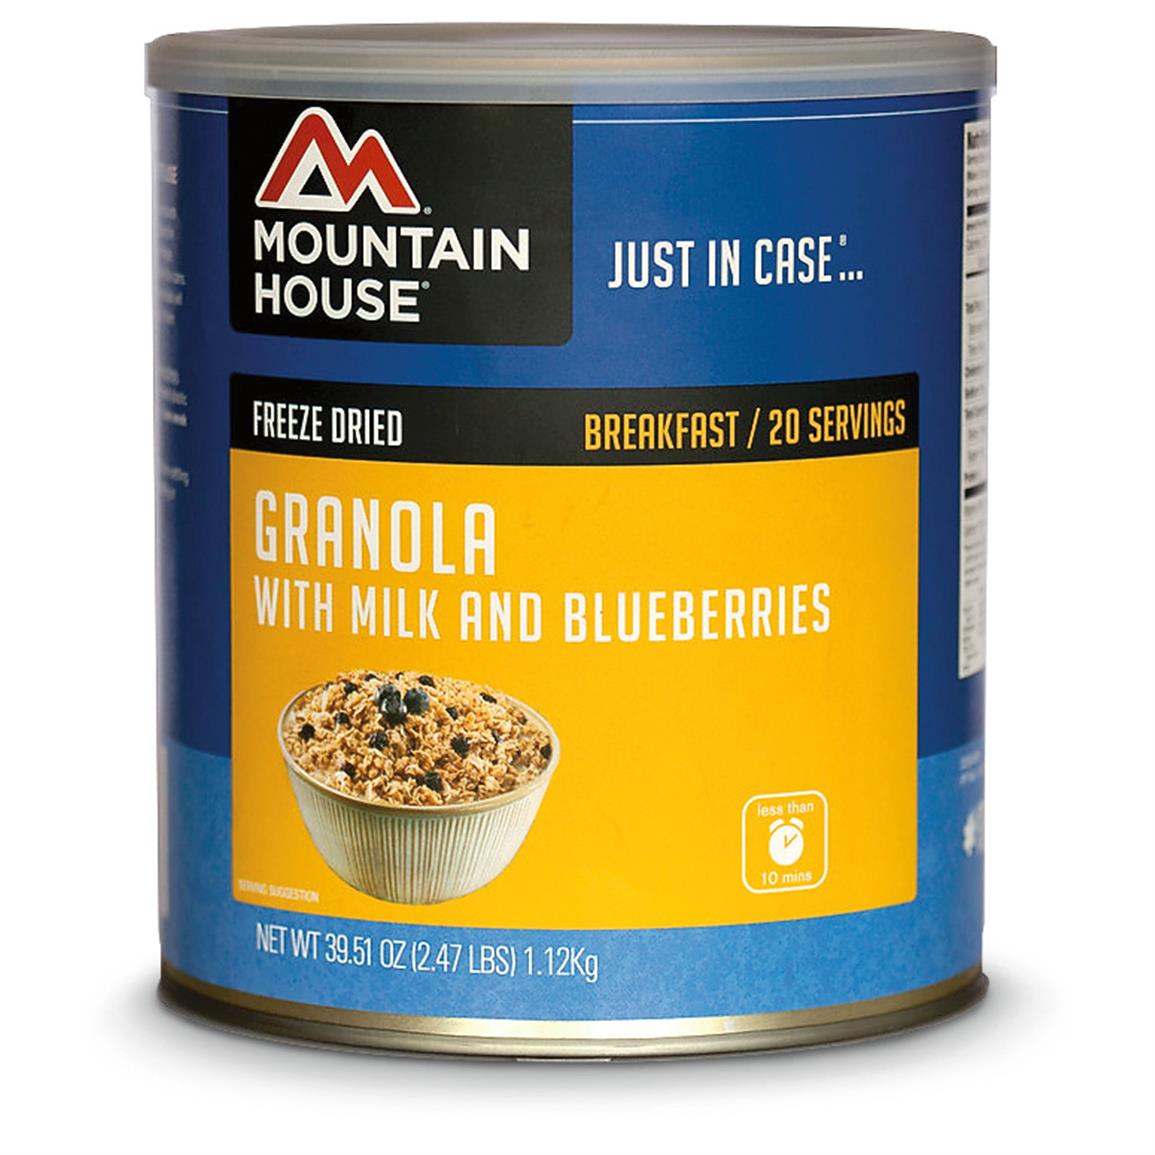 Mountain House Emergency Food Freeze-Dried Blueberry Granola, 20 Servings